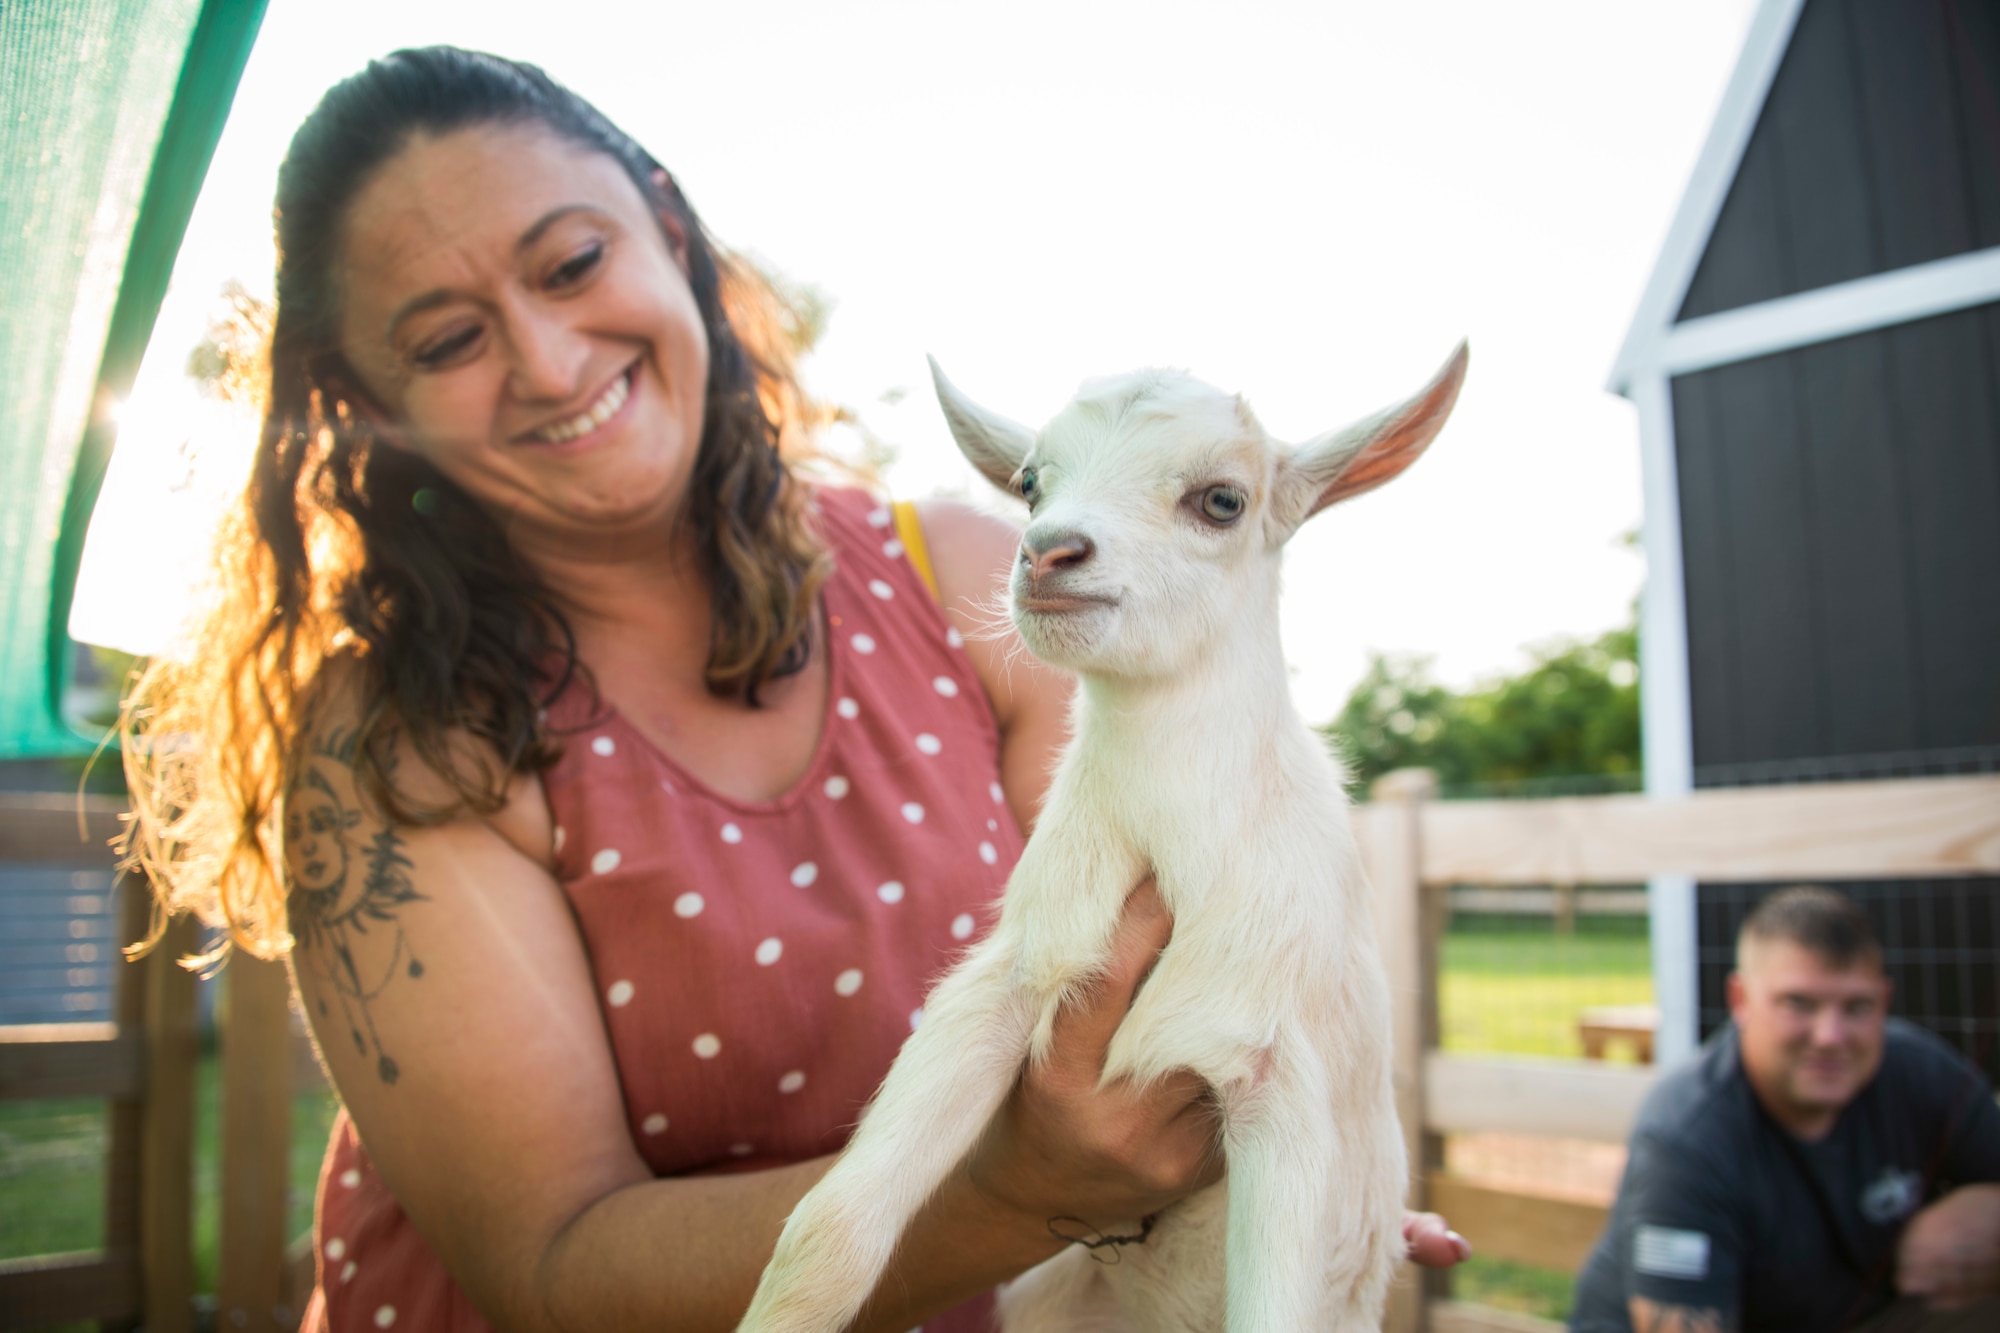 Desiree Kessler, wife of U.S. Air Force Master Sgt. Thomas Kessler, 97th Logistics Readiness Squadron Vehicle Management Flight superintendent, holds a baby goat on 1AB Ranch in Altus, Oklahoma, Aug. 5, 2021. Desiree is a hairstylist and grew up in Arkansas around farm animals. (U.S. Air Force photo by Senior Airman Amanda Lovelace)